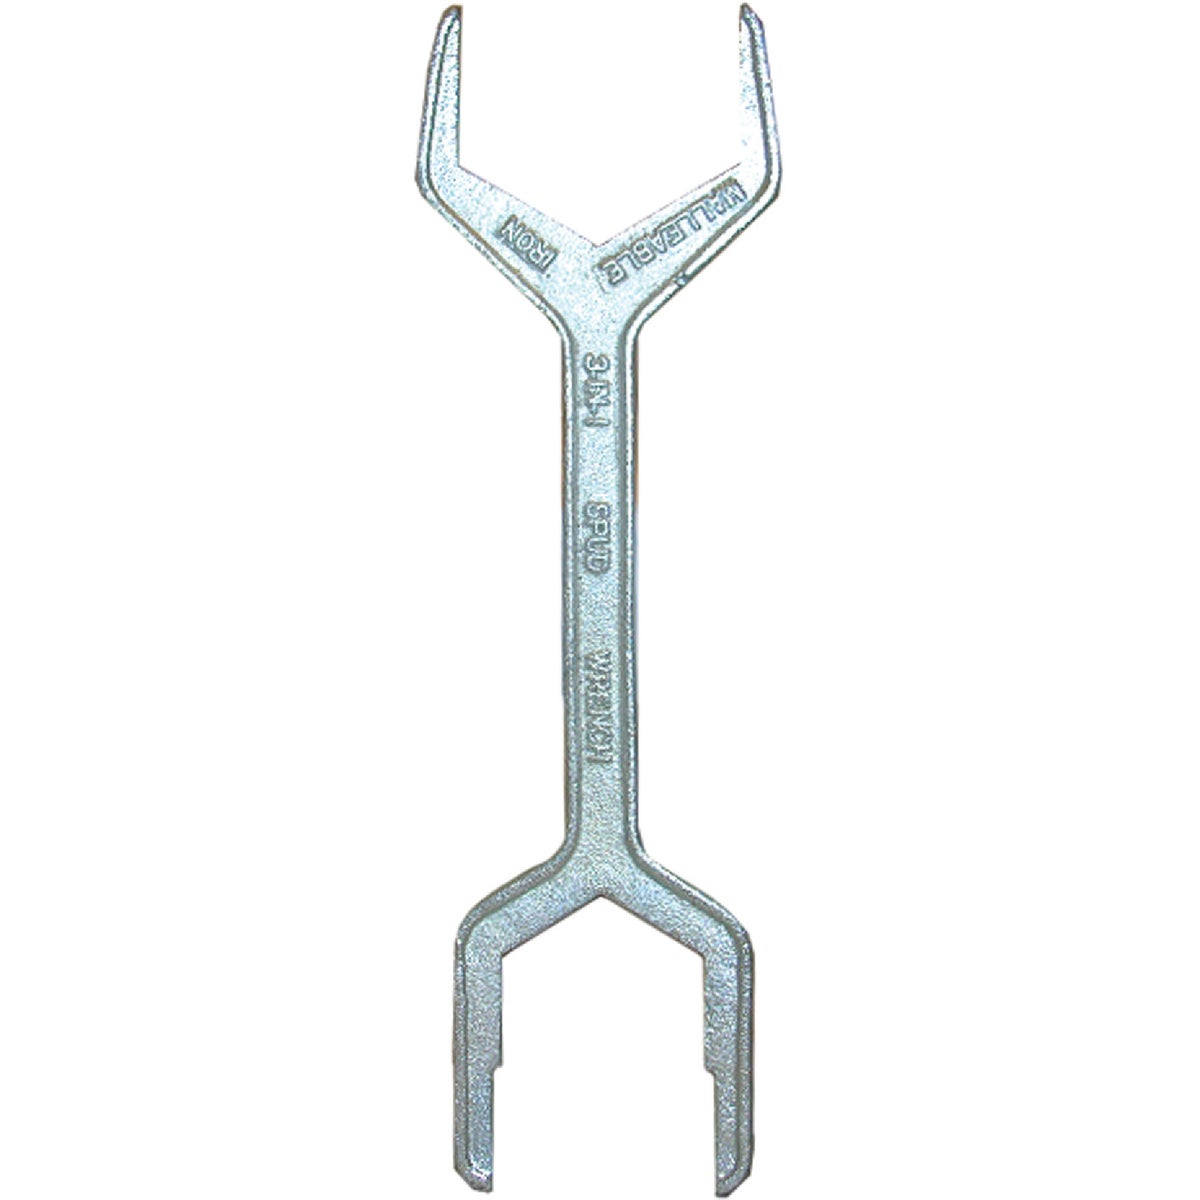 Lasco 13-2059 Lasco 11.75 In. Die Cast Bright Plated Plumber's Wrench 13-2059